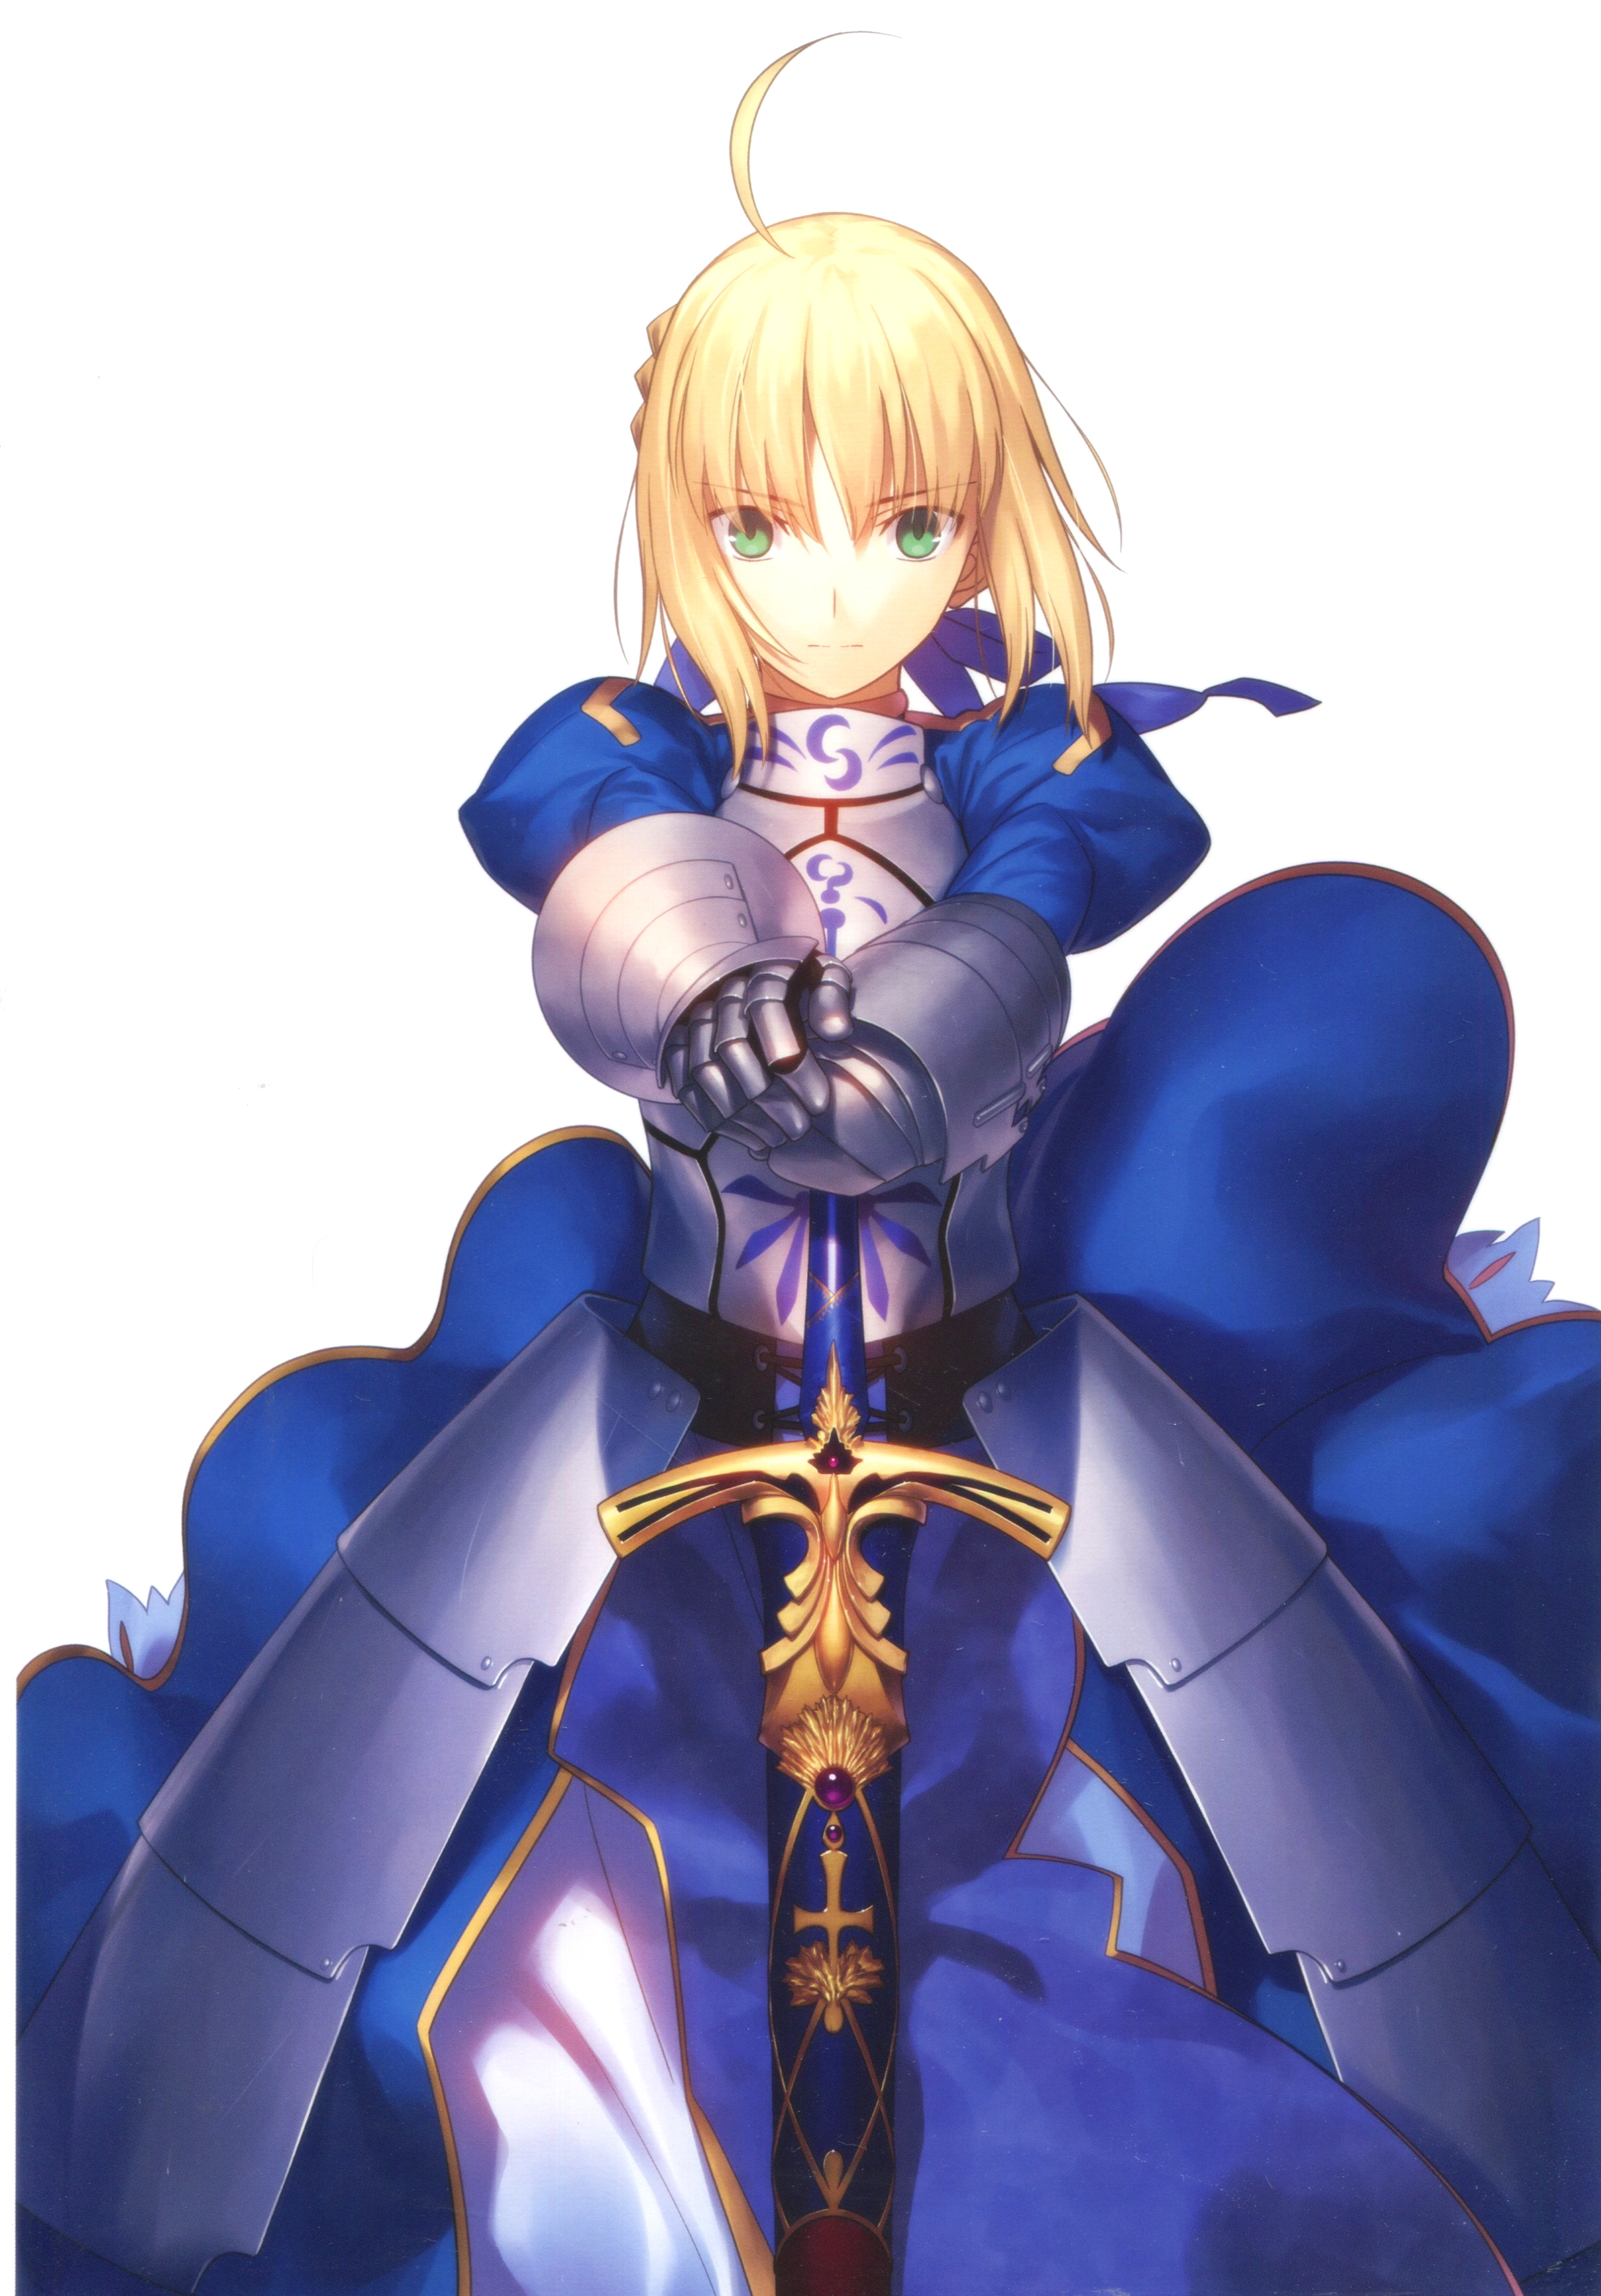 Anime 2420x3470 Artoria Pendragon Fate/Stay Night armor gauntlets blonde green eyes Caliburn (Fate series) sword Fate/Stay Night: Unlimited Blade Works anime girls sword with gold fittings Sword with Diamonds Scabbard with Diamonds Scabbard with Gold fittings Gold-trimmed clothes pale detailed details high detail Caucasian